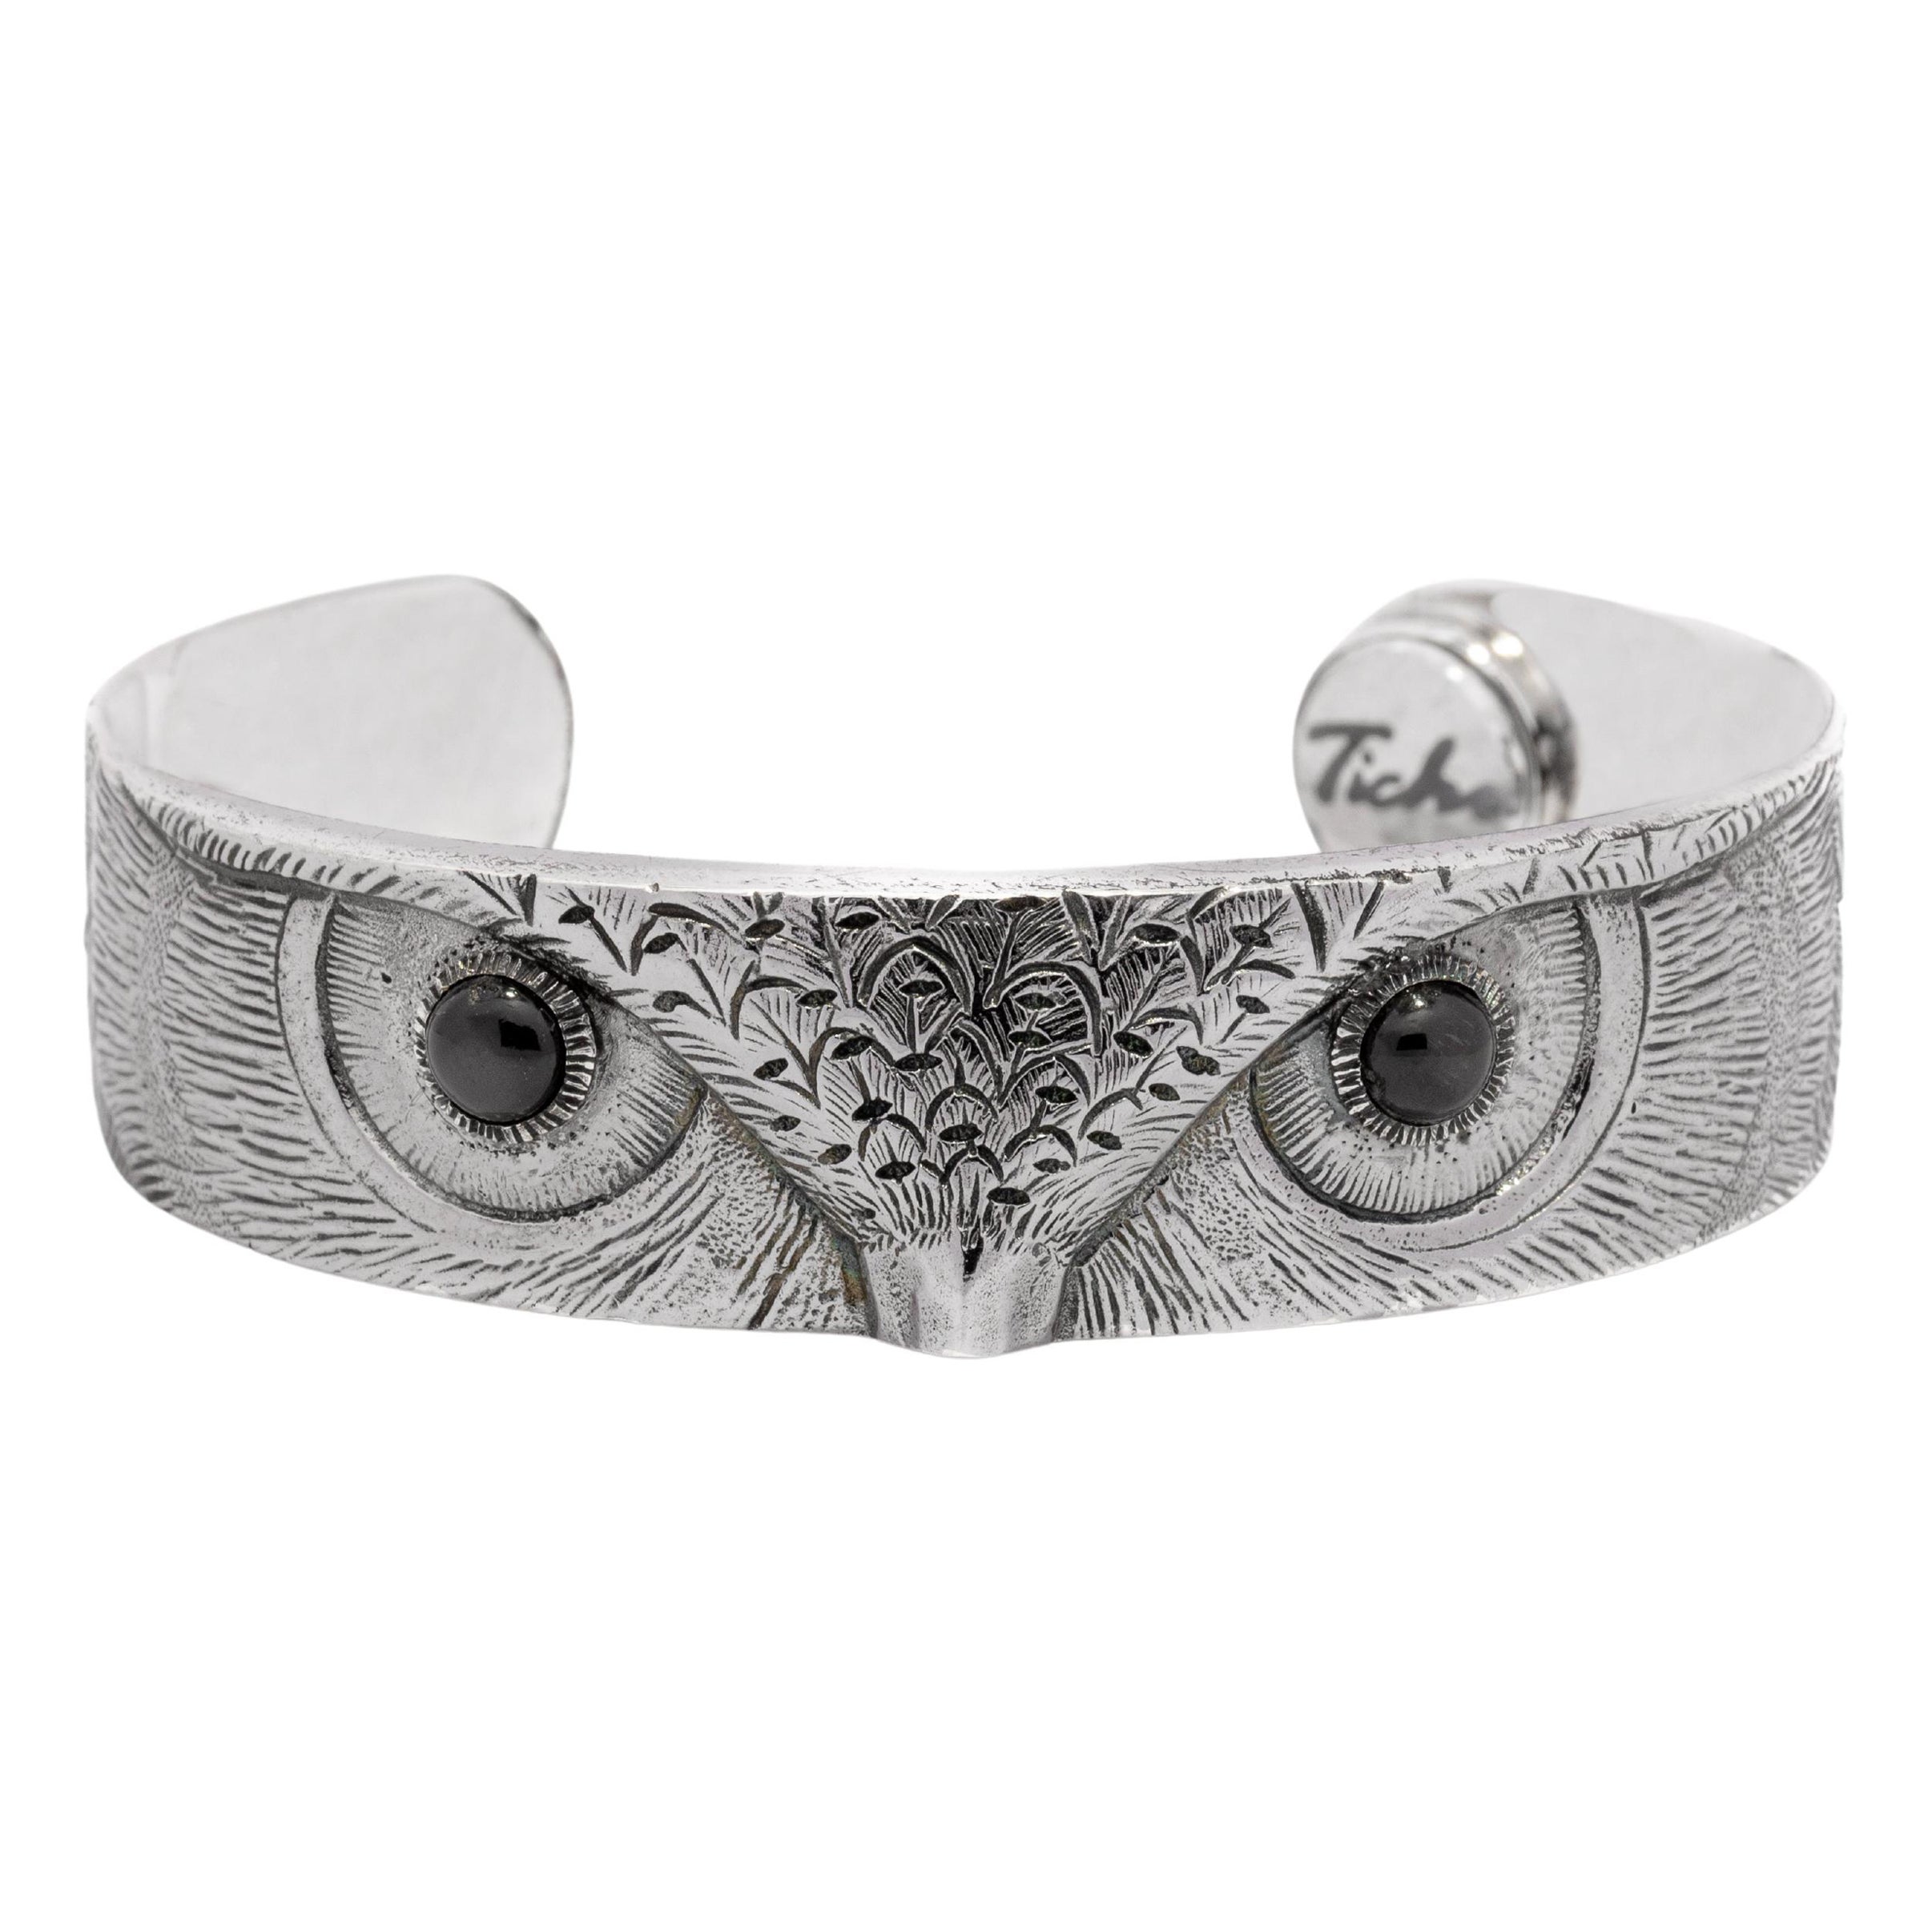 Tichu Black Star Owl Eye Cuff in Sterling Silver and Crystal Quartz 'Size S' For Sale